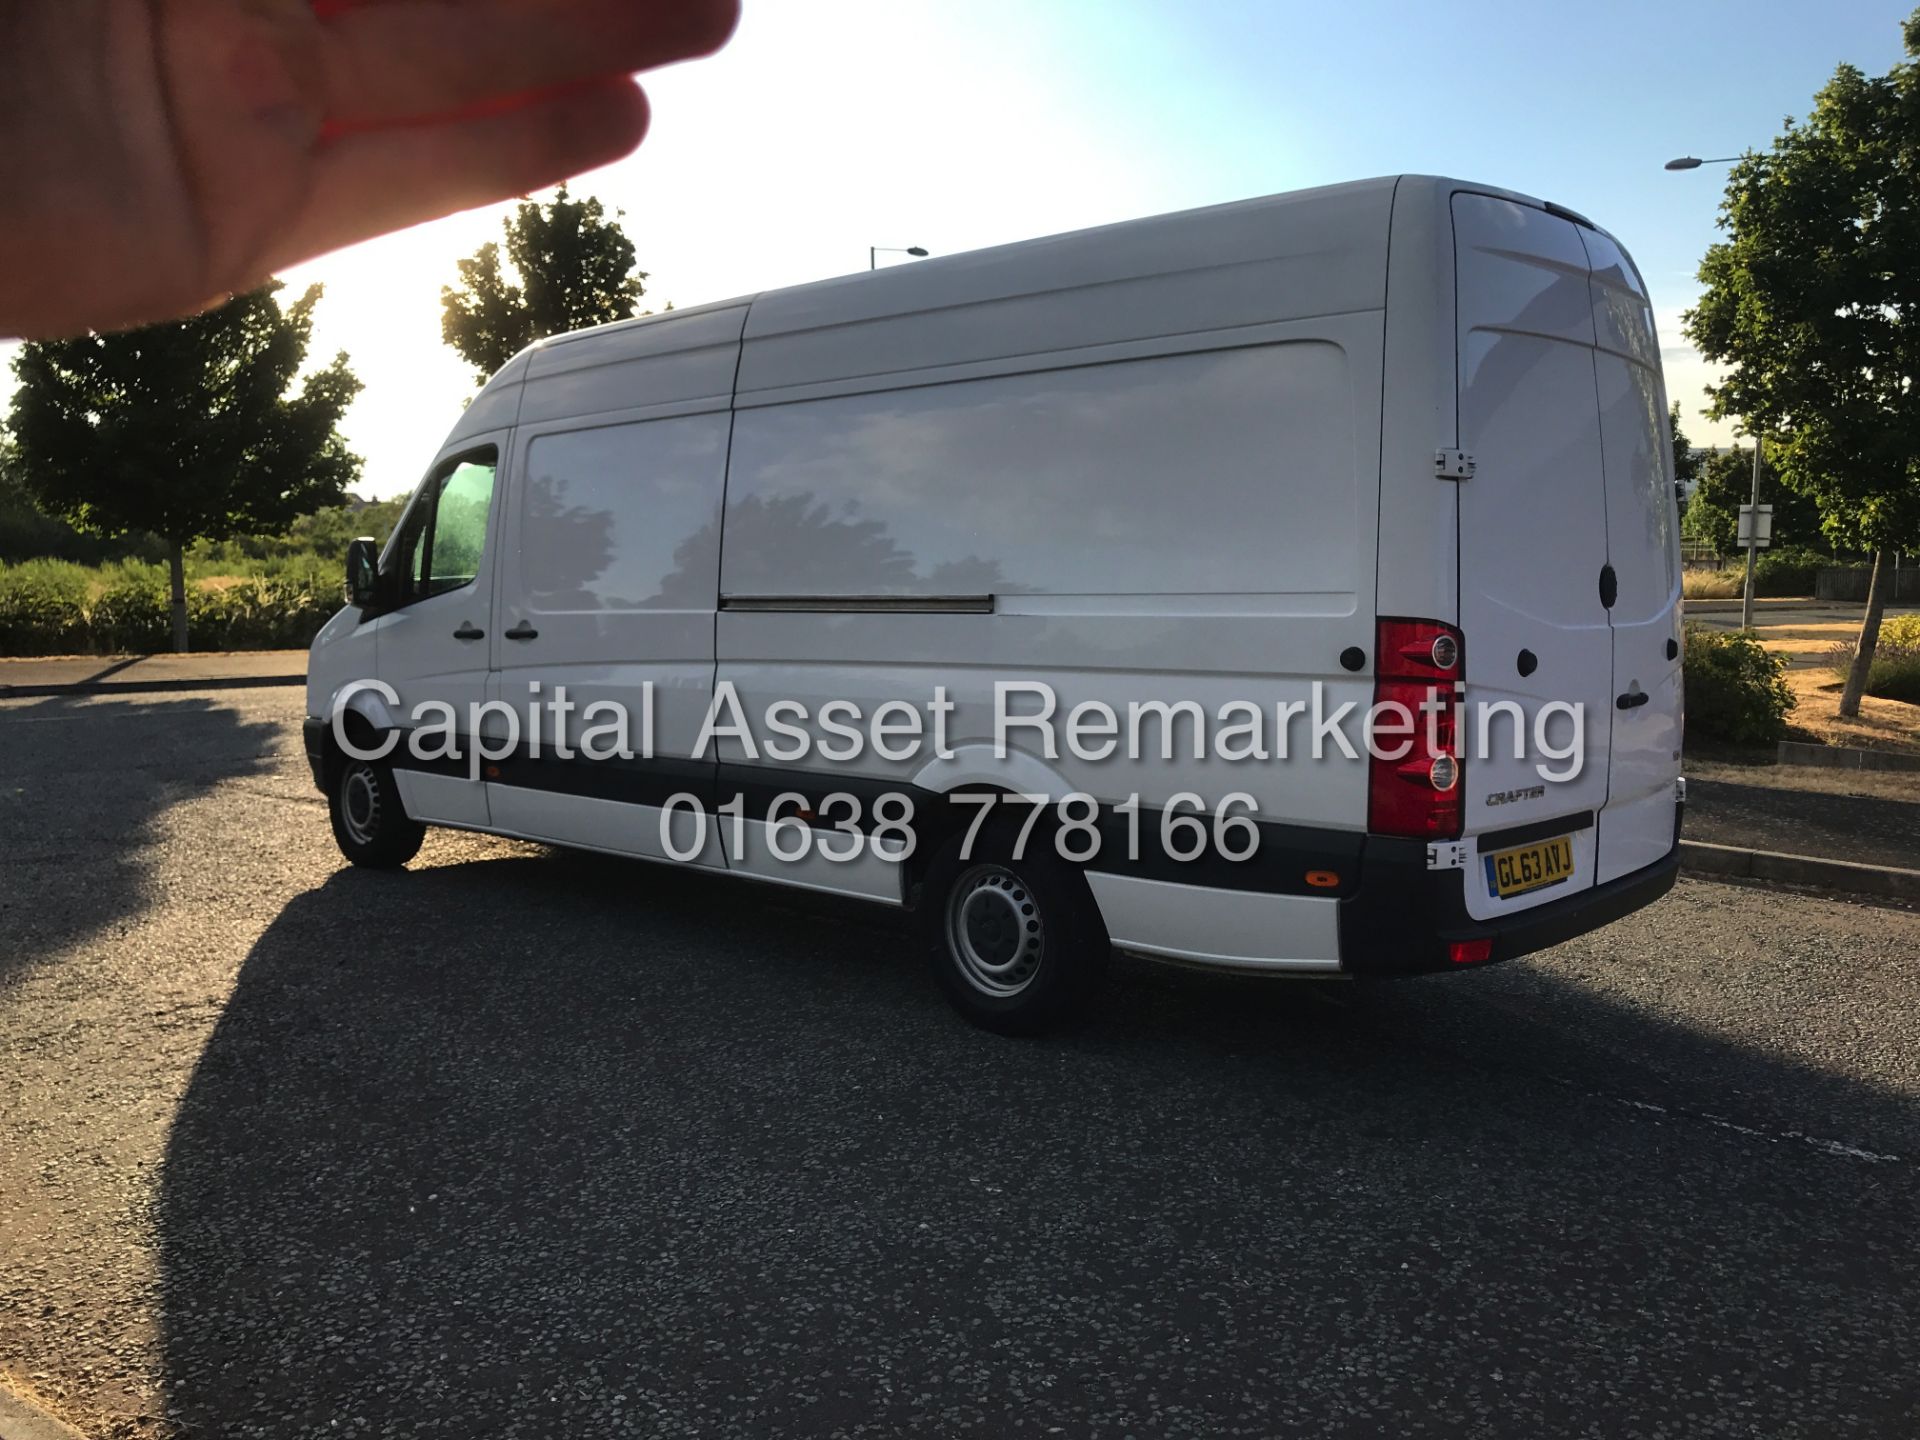 VOLKSWAGEN CRAFTER 2.0TDI LONG WHEEL BASE 4.2 MTR HIGH TOP - 2014 REG - 1 OWNER - SERVICE HISTORY - Image 11 of 18